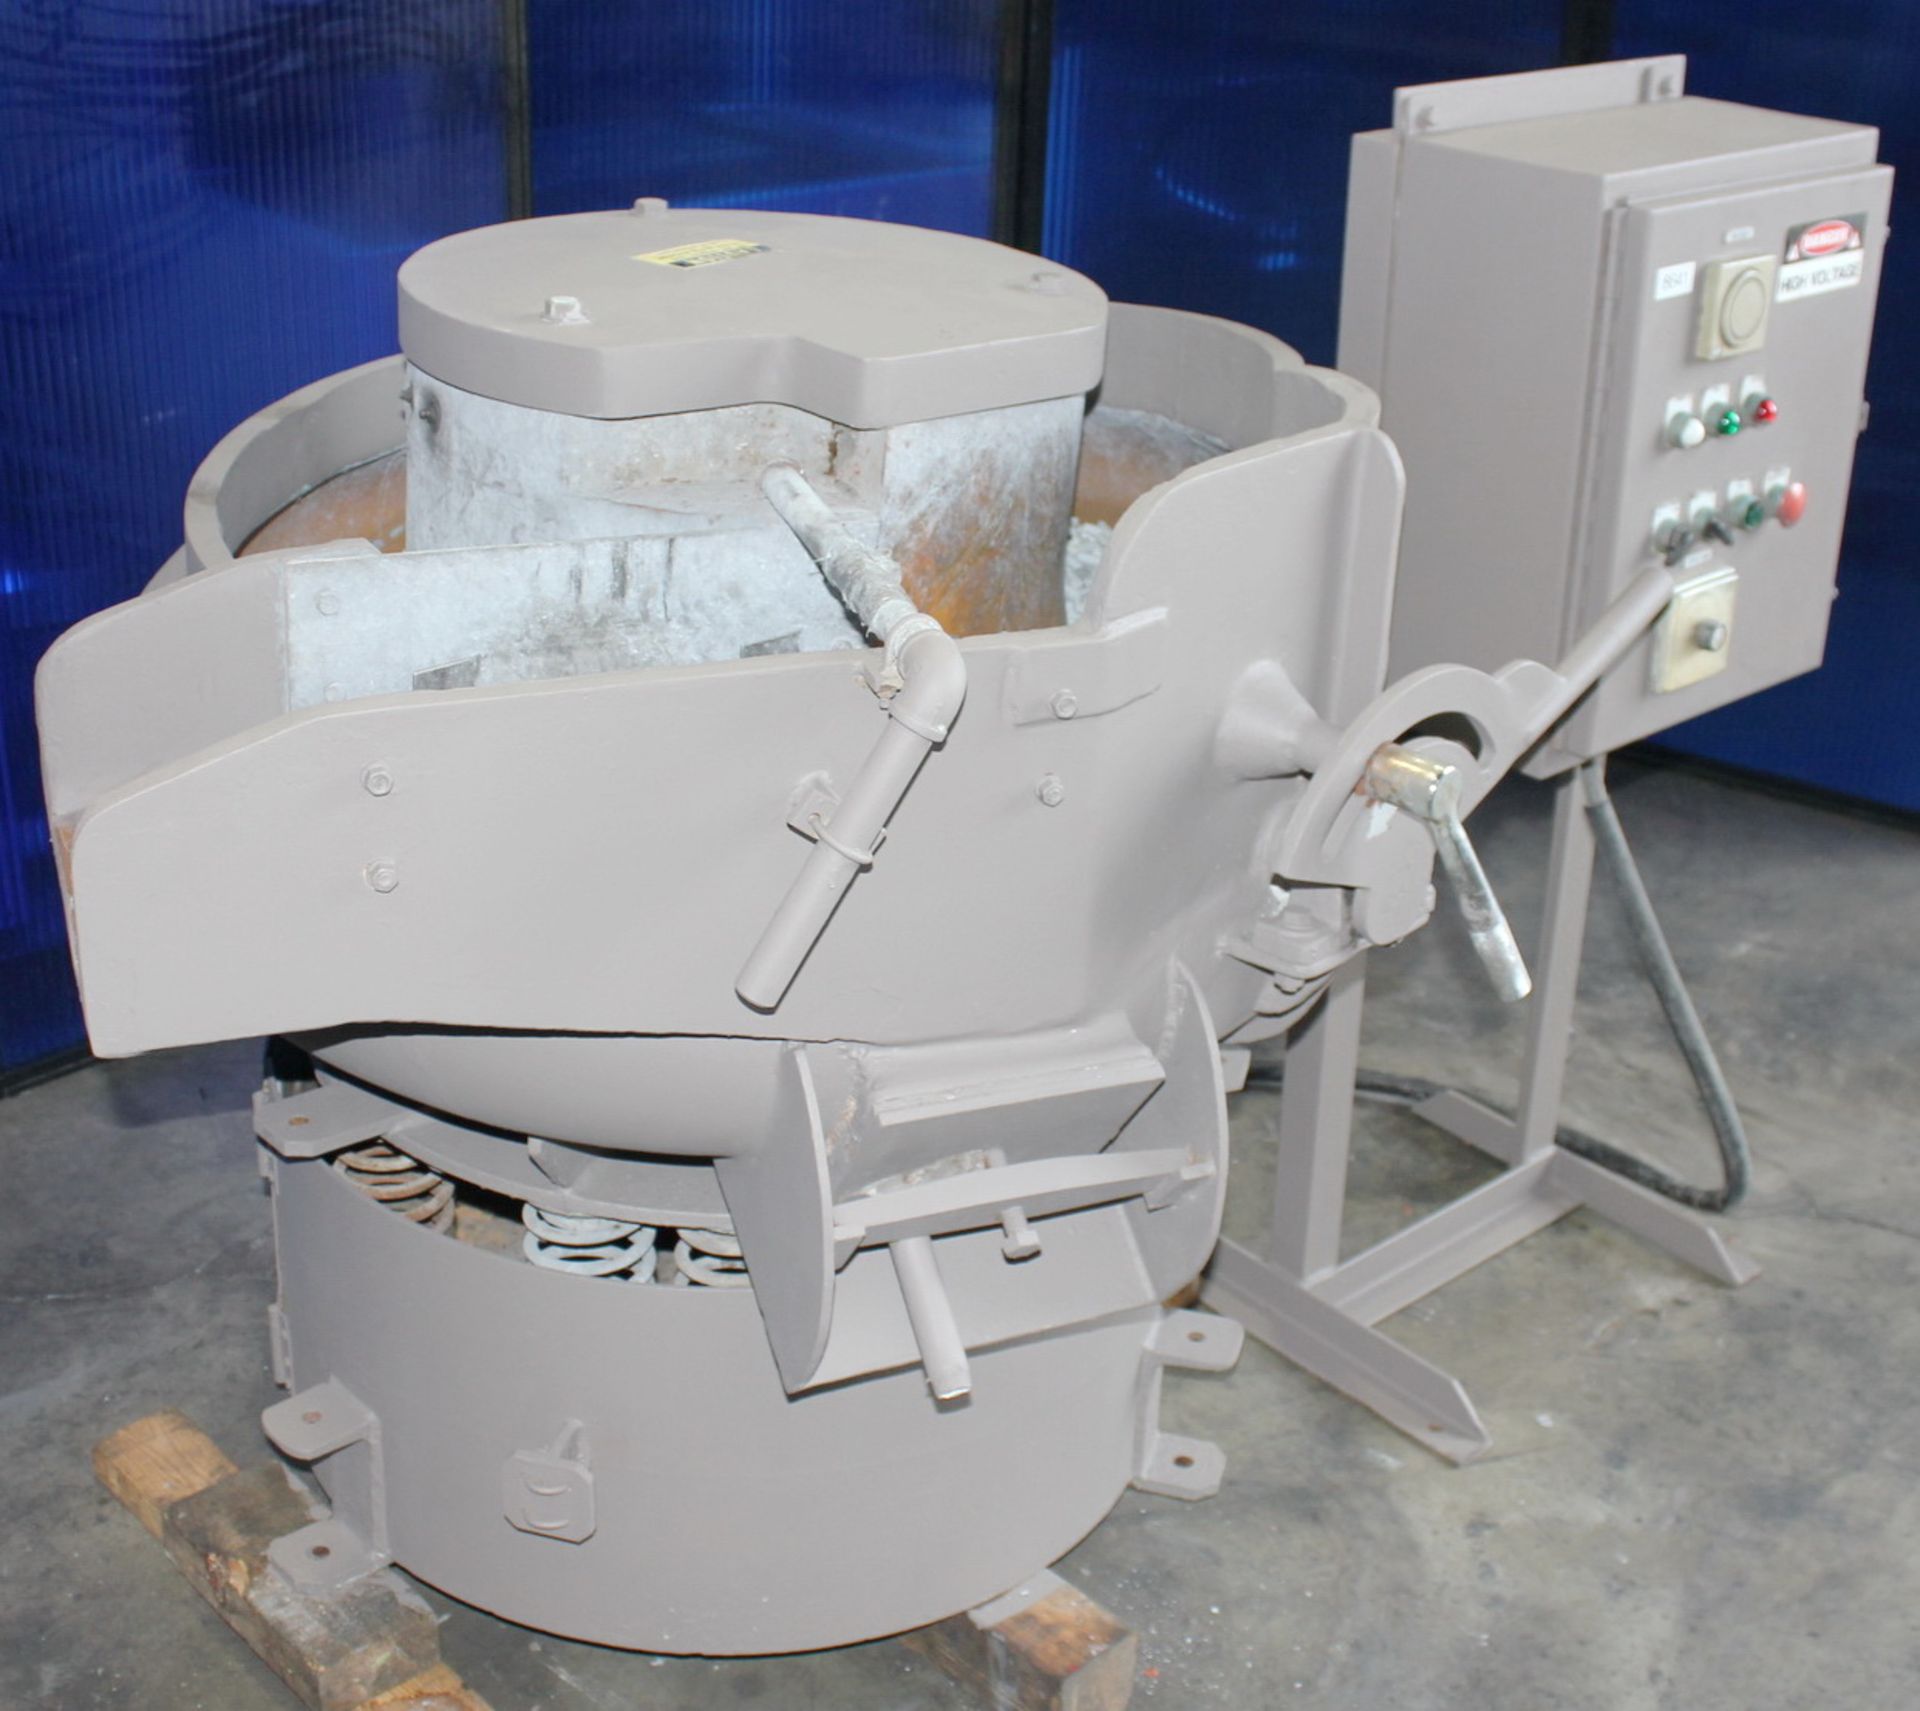 Gyromatic - Vibratory Deburring Machine (Bowl Type) | 4.5 Cubic Feet, Located In Huntington Park, CA - Image 2 of 13